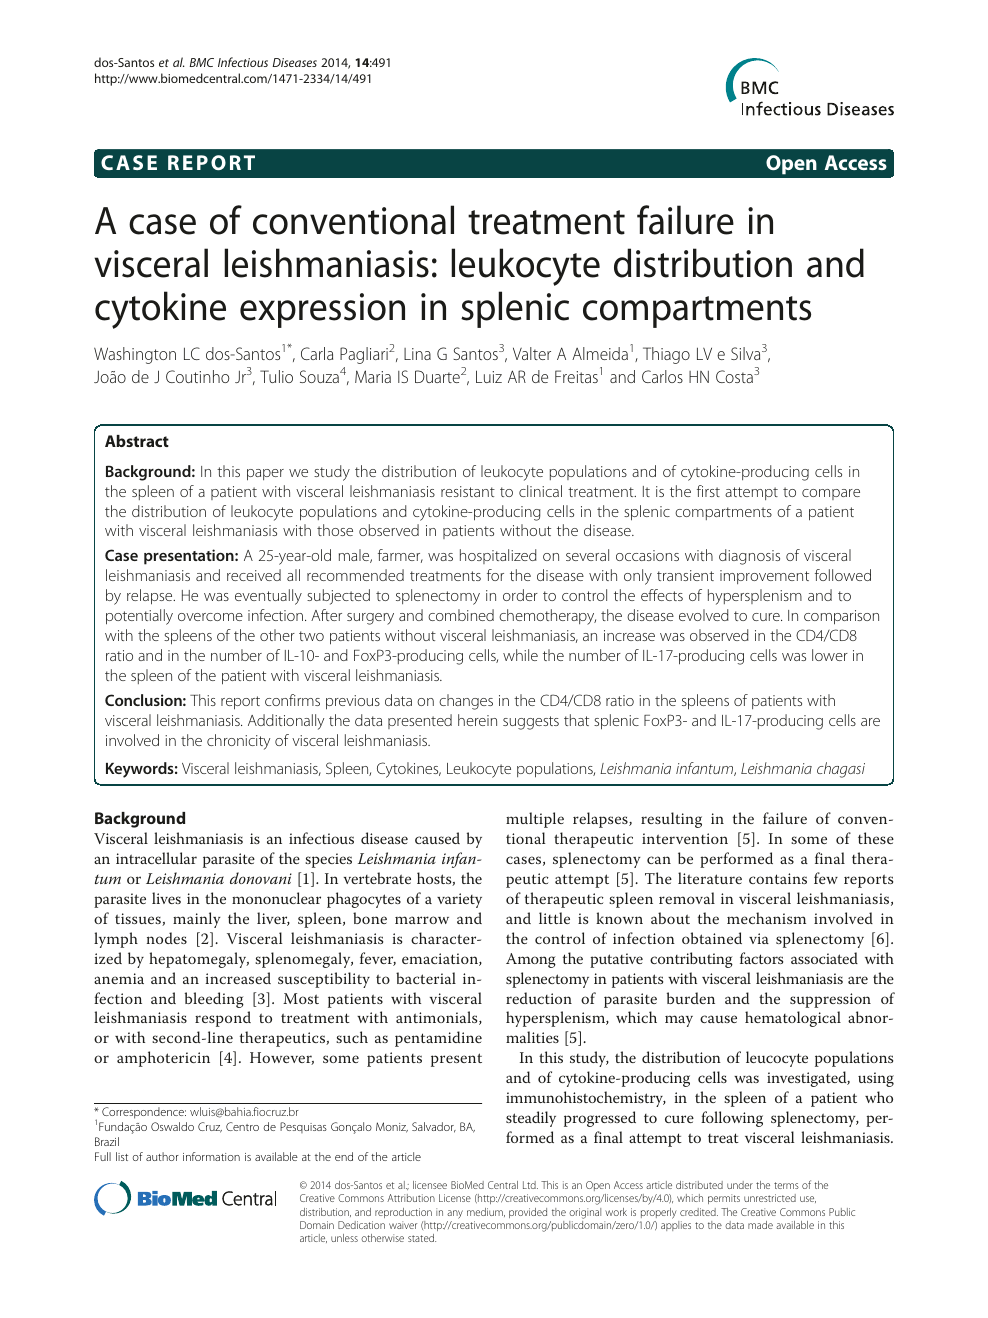 A Case Of Conventional Treatment Failure In Visceral Leishmaniasis Leukocyte Distribution And Cytokine Expression In Splenic Compartments Topic Of Research Paper In Clinical Medicine Download Scholarly Article Pdf And Read For